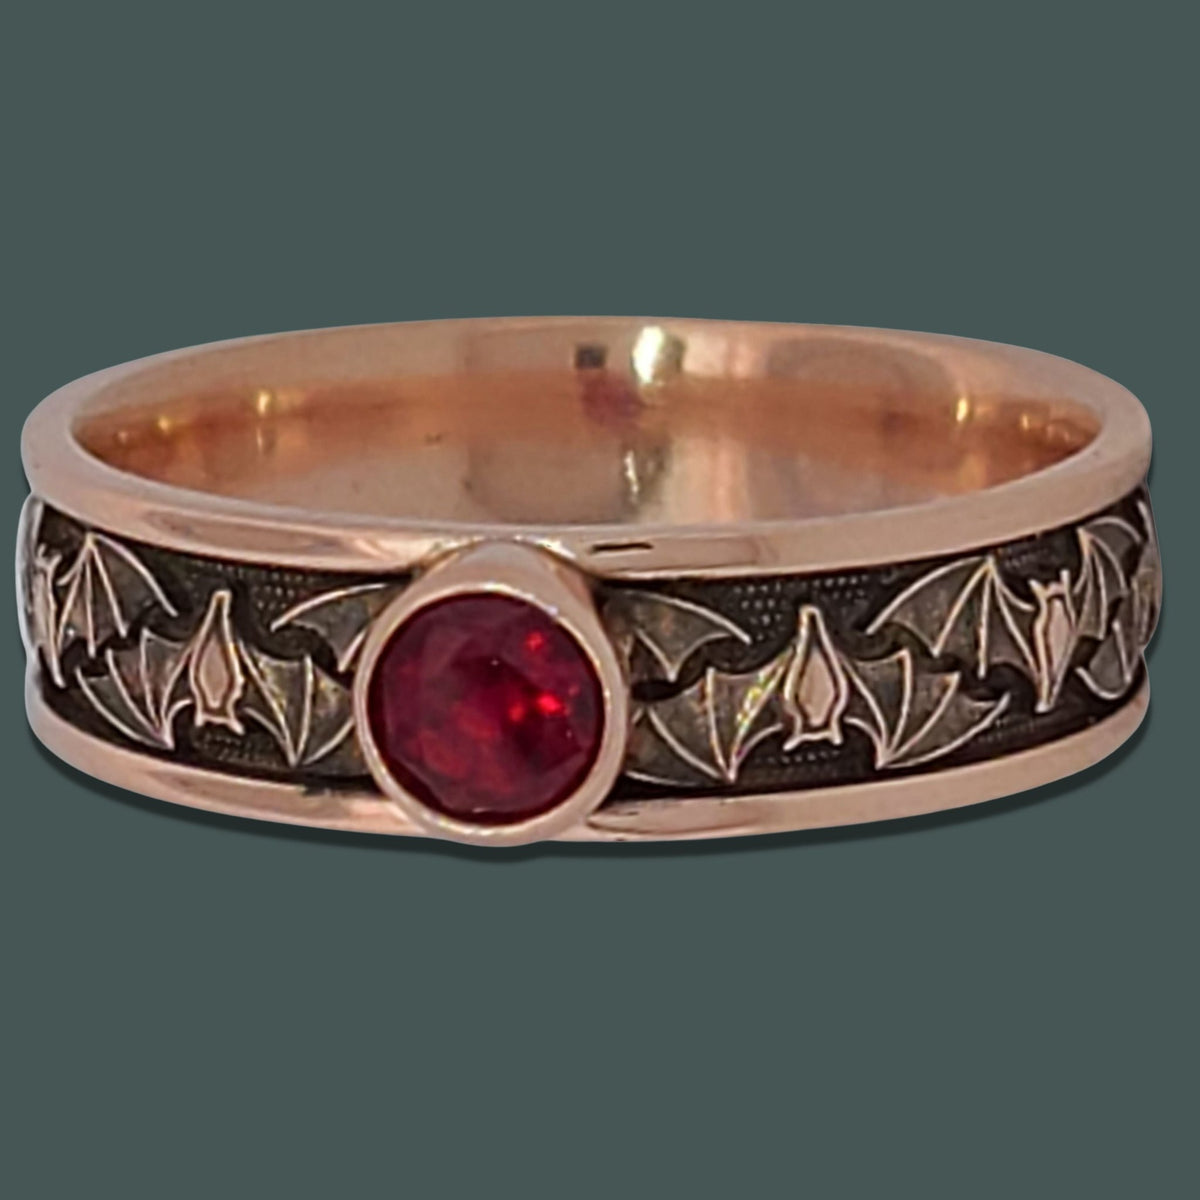 BAT NARROW SOLITAIRE Band Ring in GOLD with CHOICE OF 5mm GEMSTONE - Starting at $449 - Celtic Jewelscapes